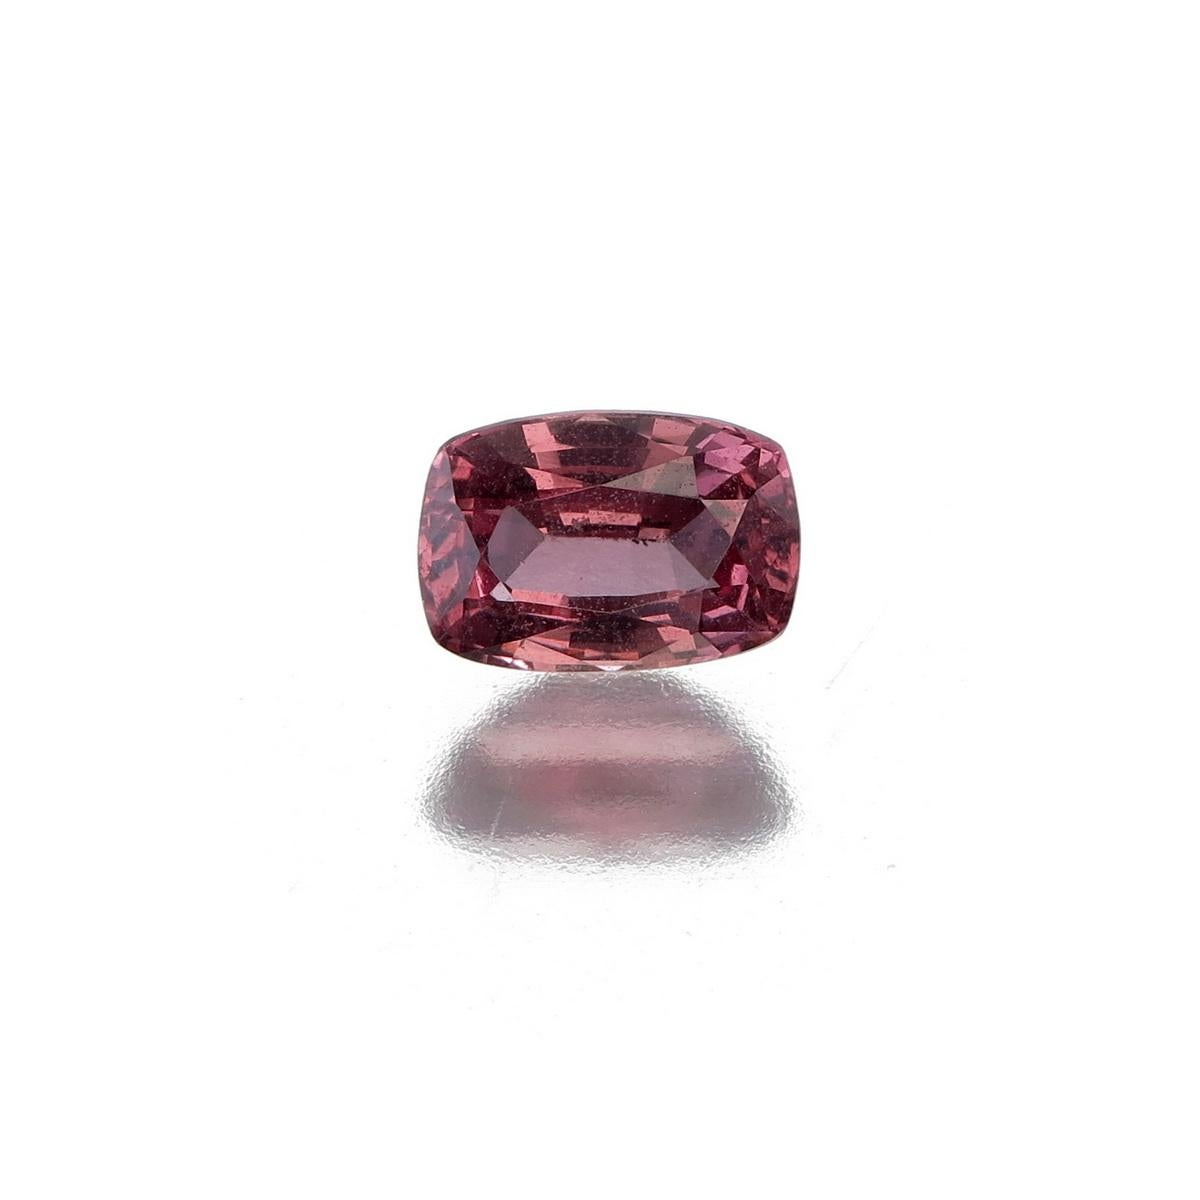 1.48 Carat Natural Pink Spinel from Burma  No Heat
Dimension: 7.72 x 5.33 x 3.87 mm
Weight: 1.48 Carat
Shape: Cushion Cut
Gil Certified  Report No: STO2022102151319